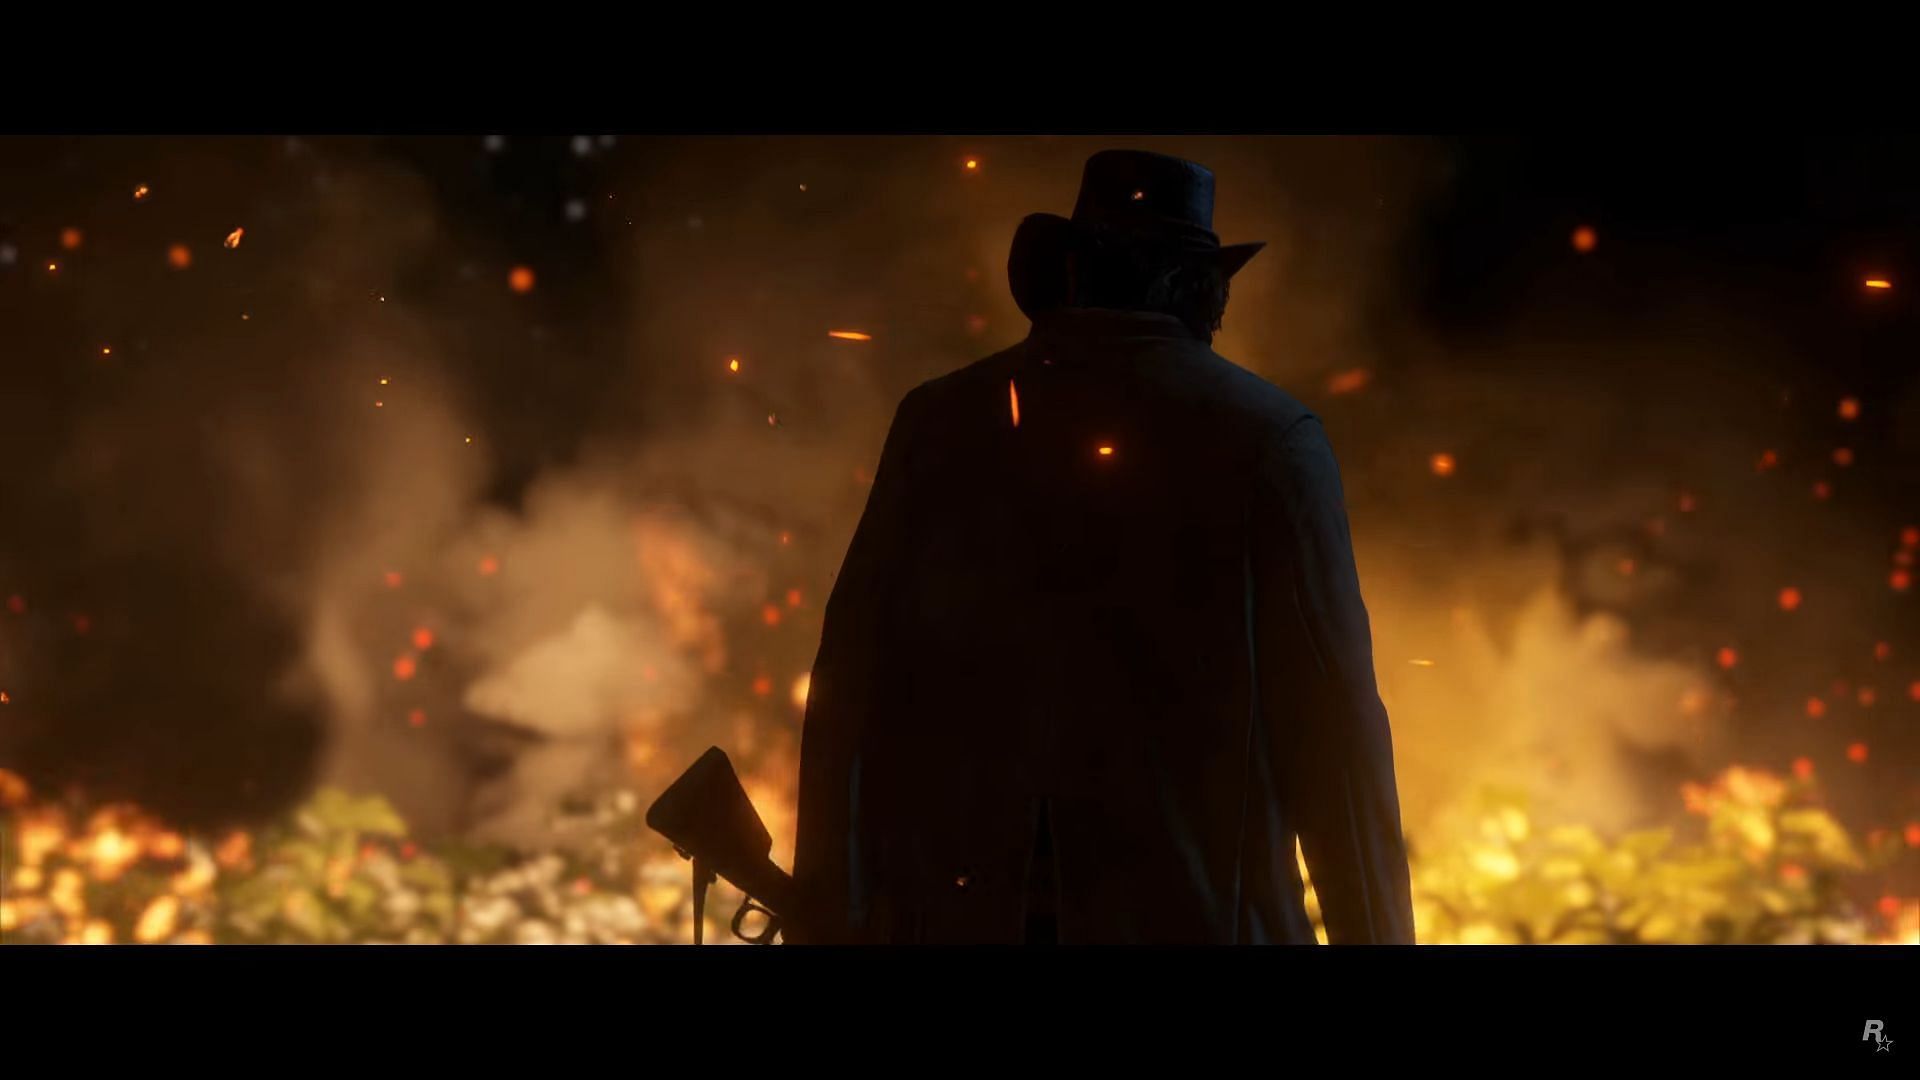 Outlaw (Image via Red Dead Redemption 2)